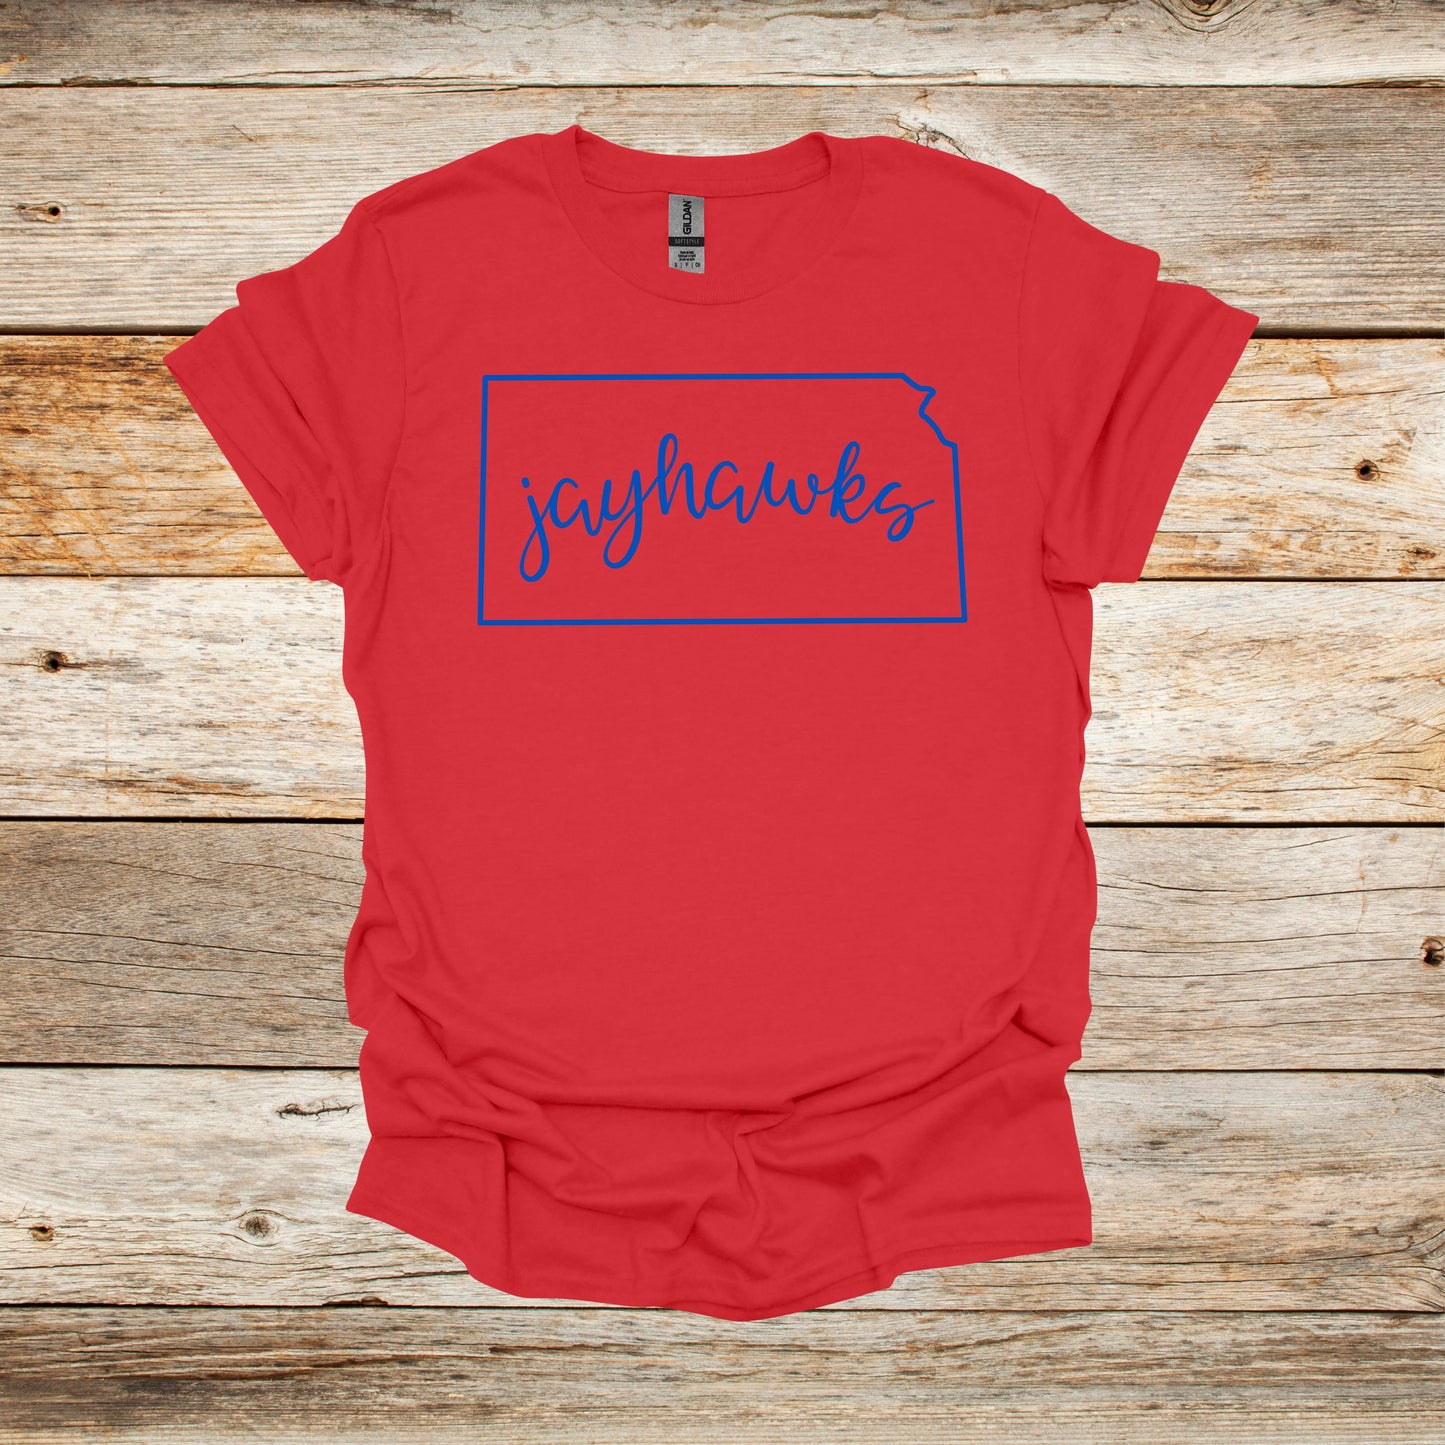 College T Shirt - Kansas Jayhawks - State Outline - Adult and Children's Tee Shirts T-Shirts Graphic Avenue Red Adult Small 